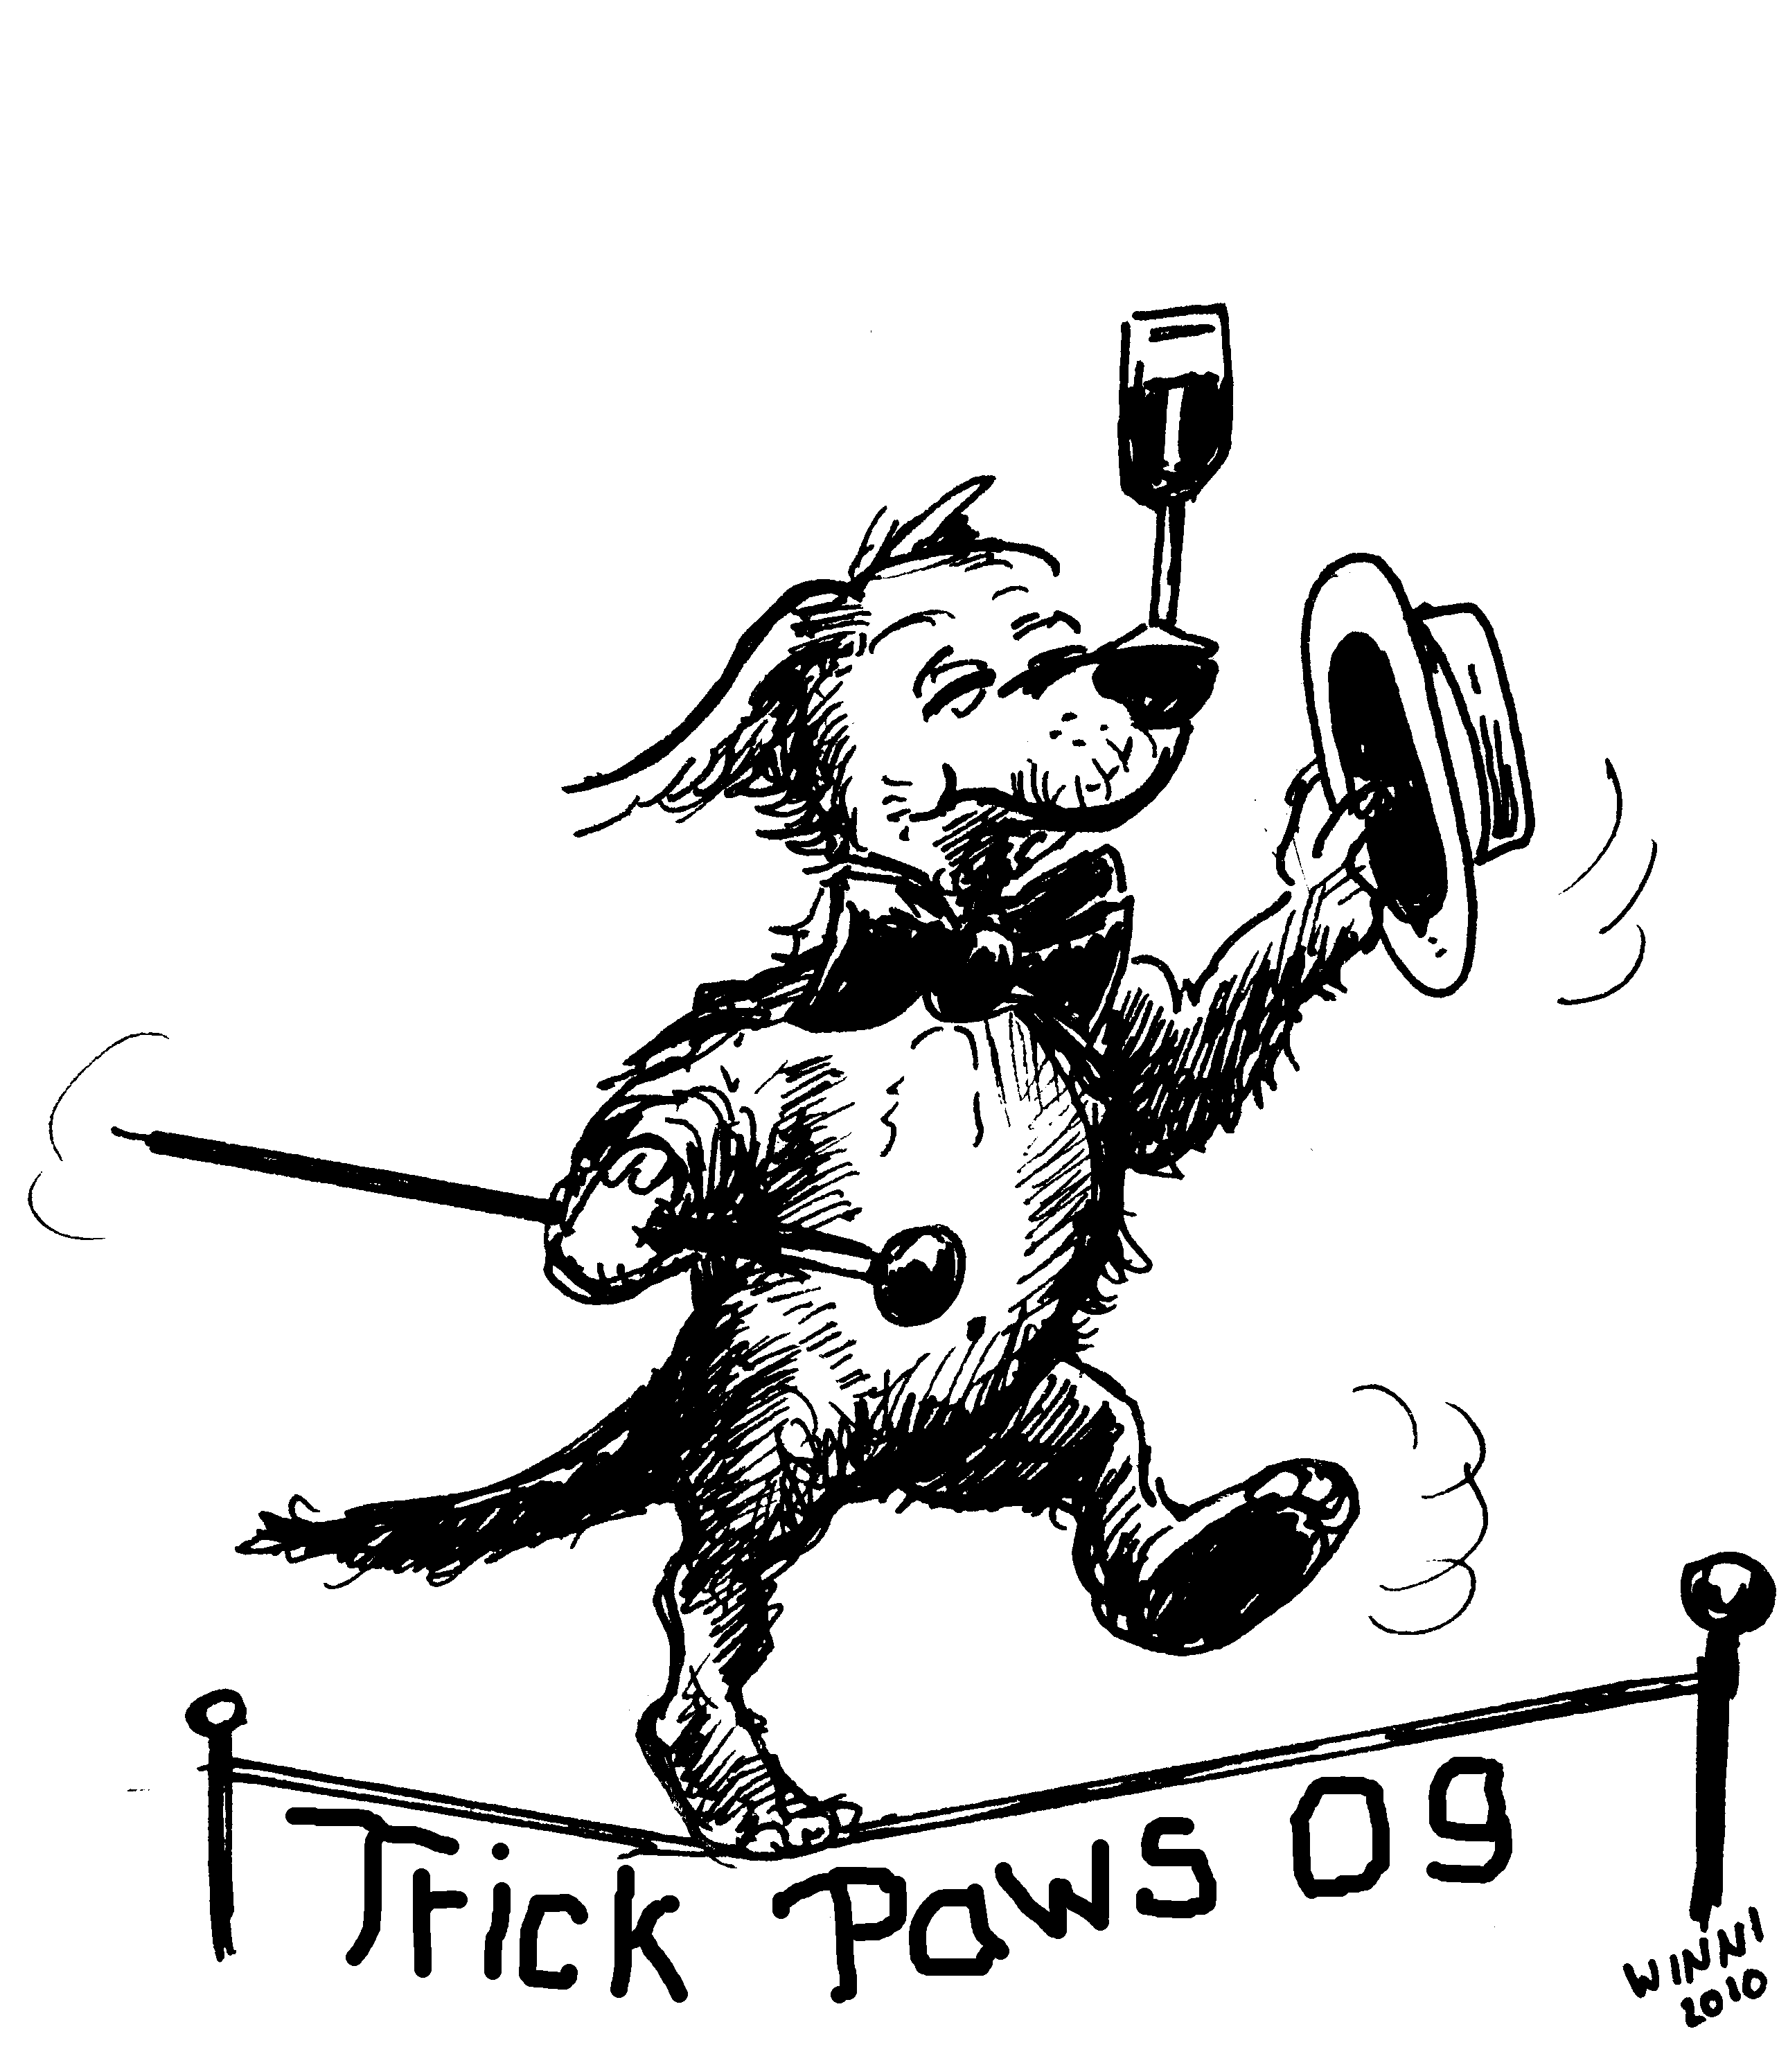 TrickPaws09